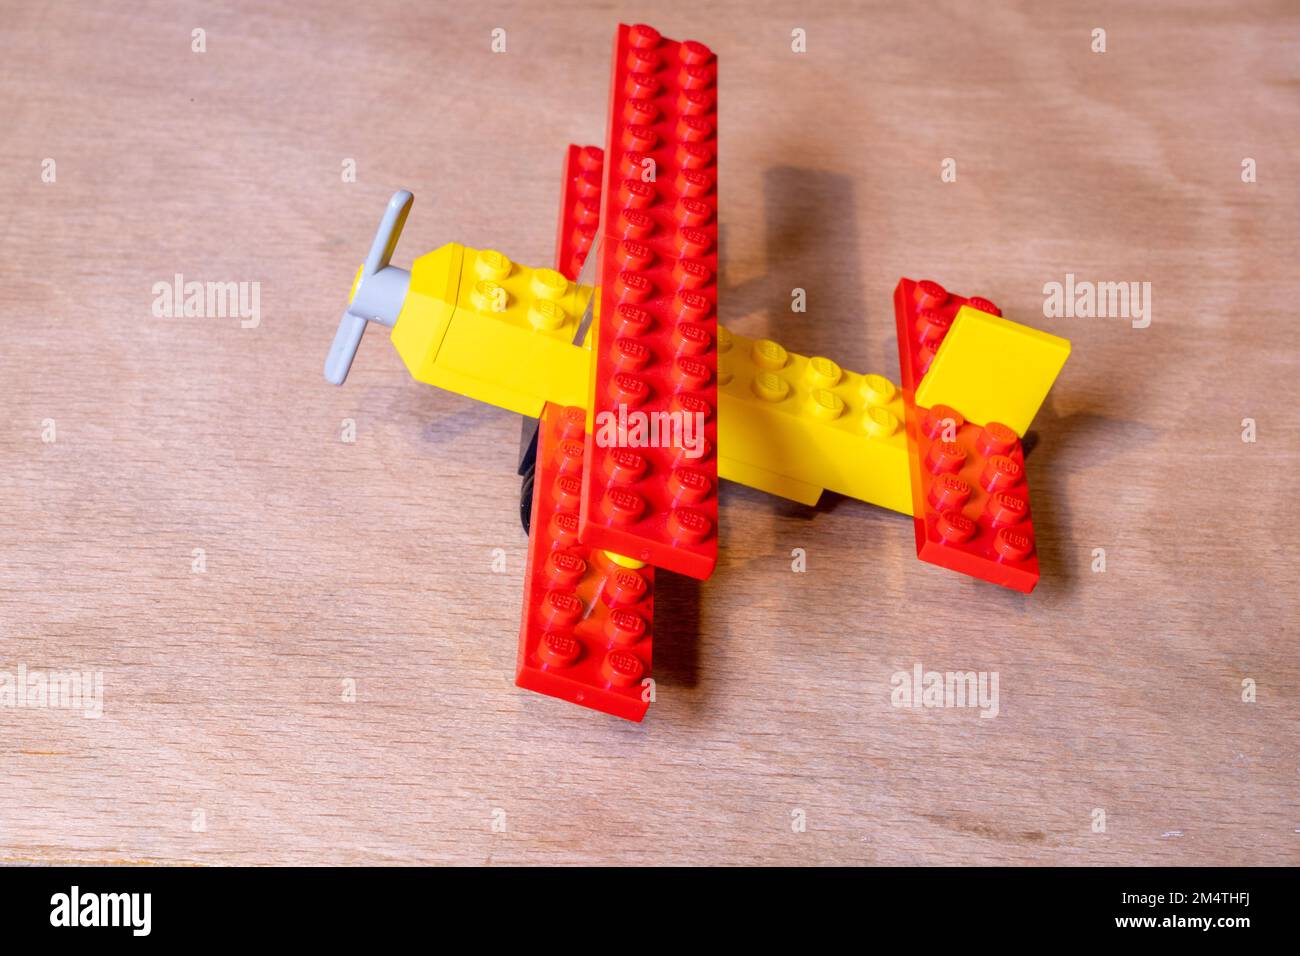 A closeup shot of a lego 613: Biplane set on a wooden surface Stock Photo -  Alamy